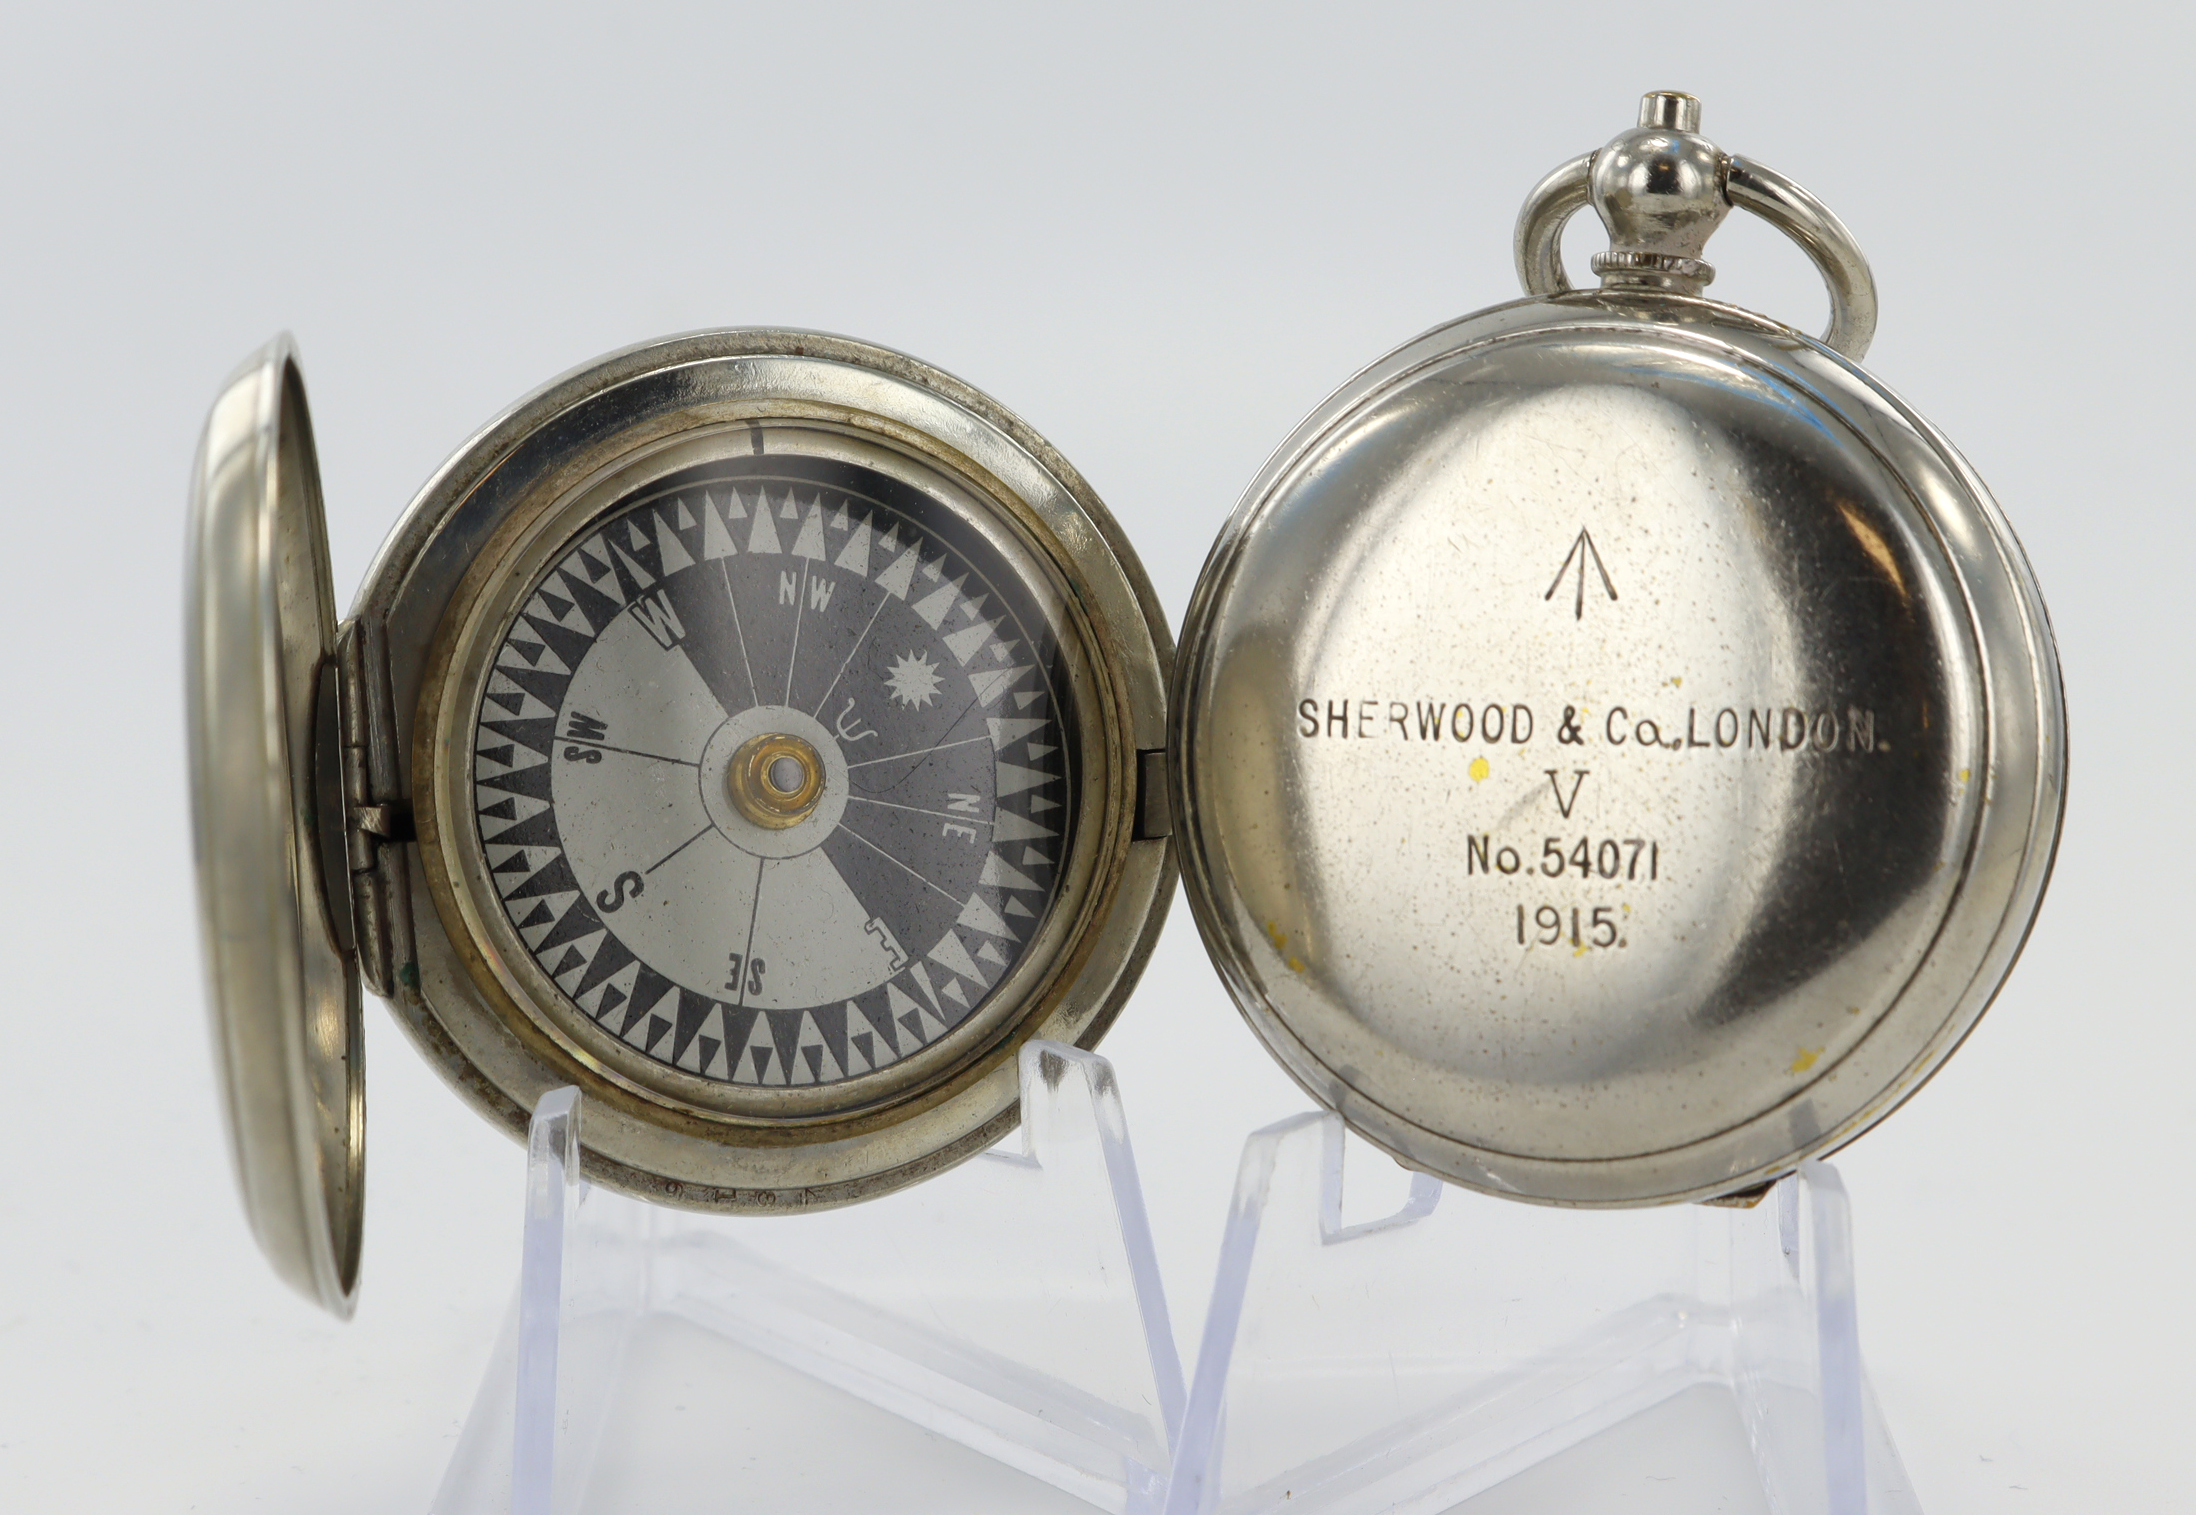 Two British Military Issue nickel cased compasses. One by Dennison dated 1916 with issue markings '↑